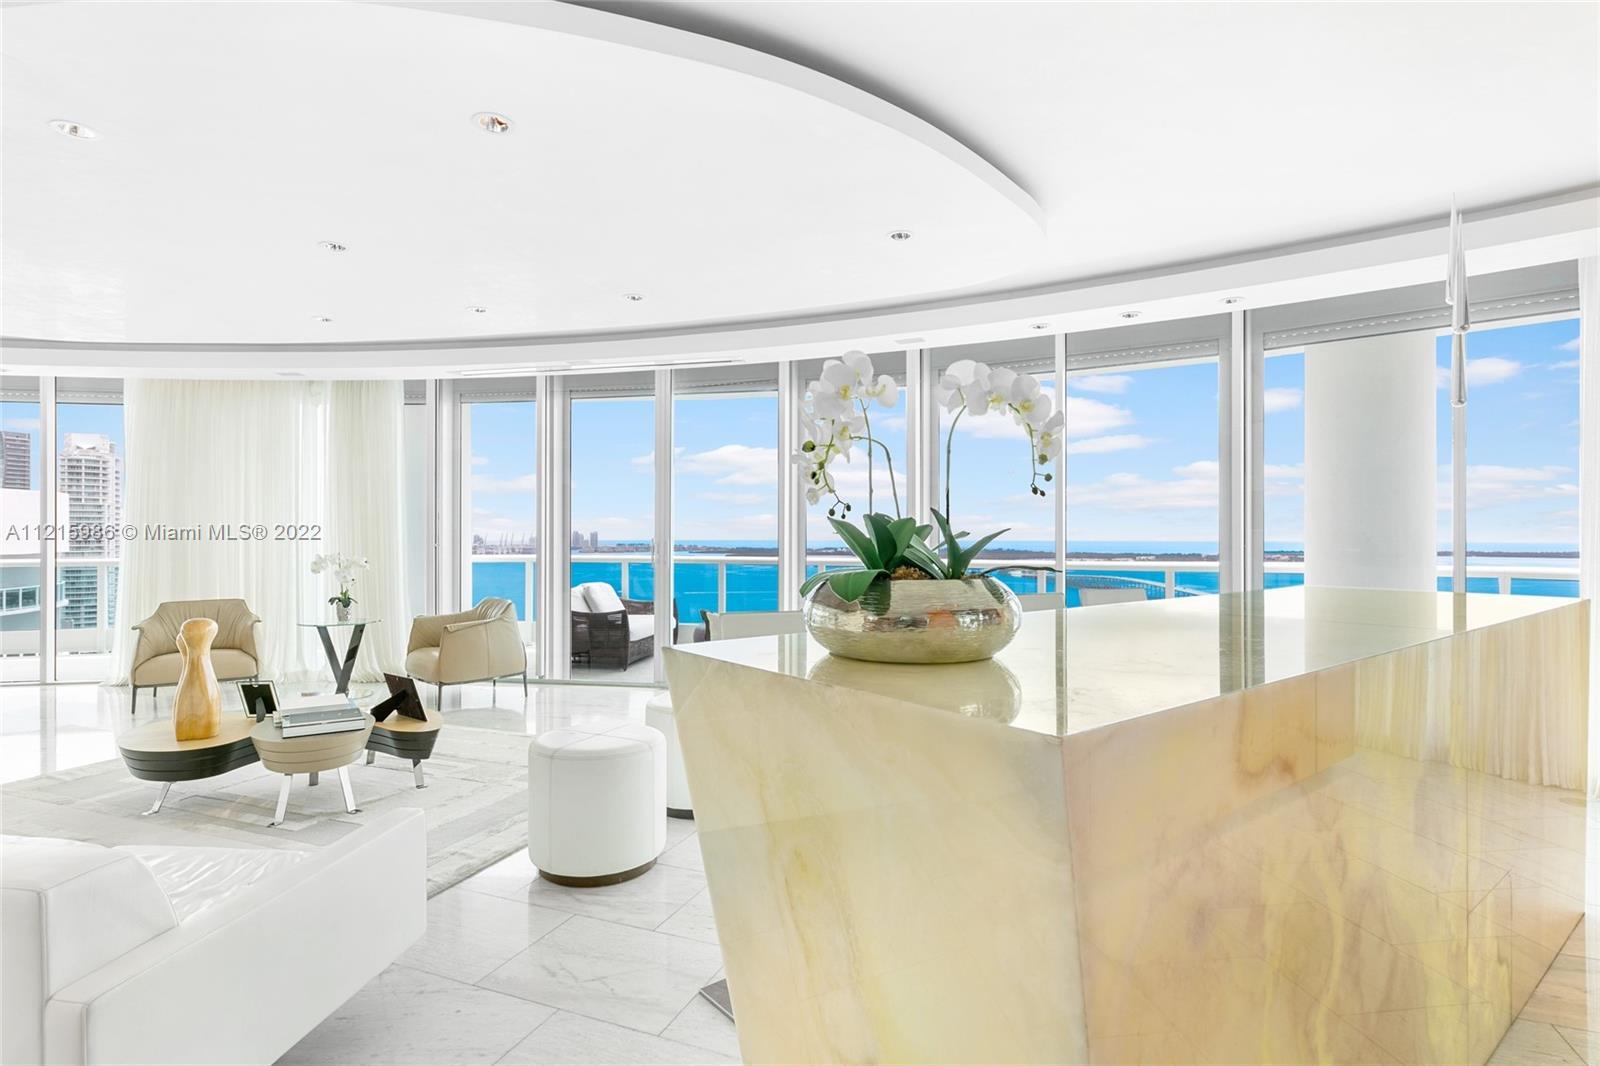 Step inside this fully renovated, luxury condo located in highly sought out Brickell, Miami. Floor-t